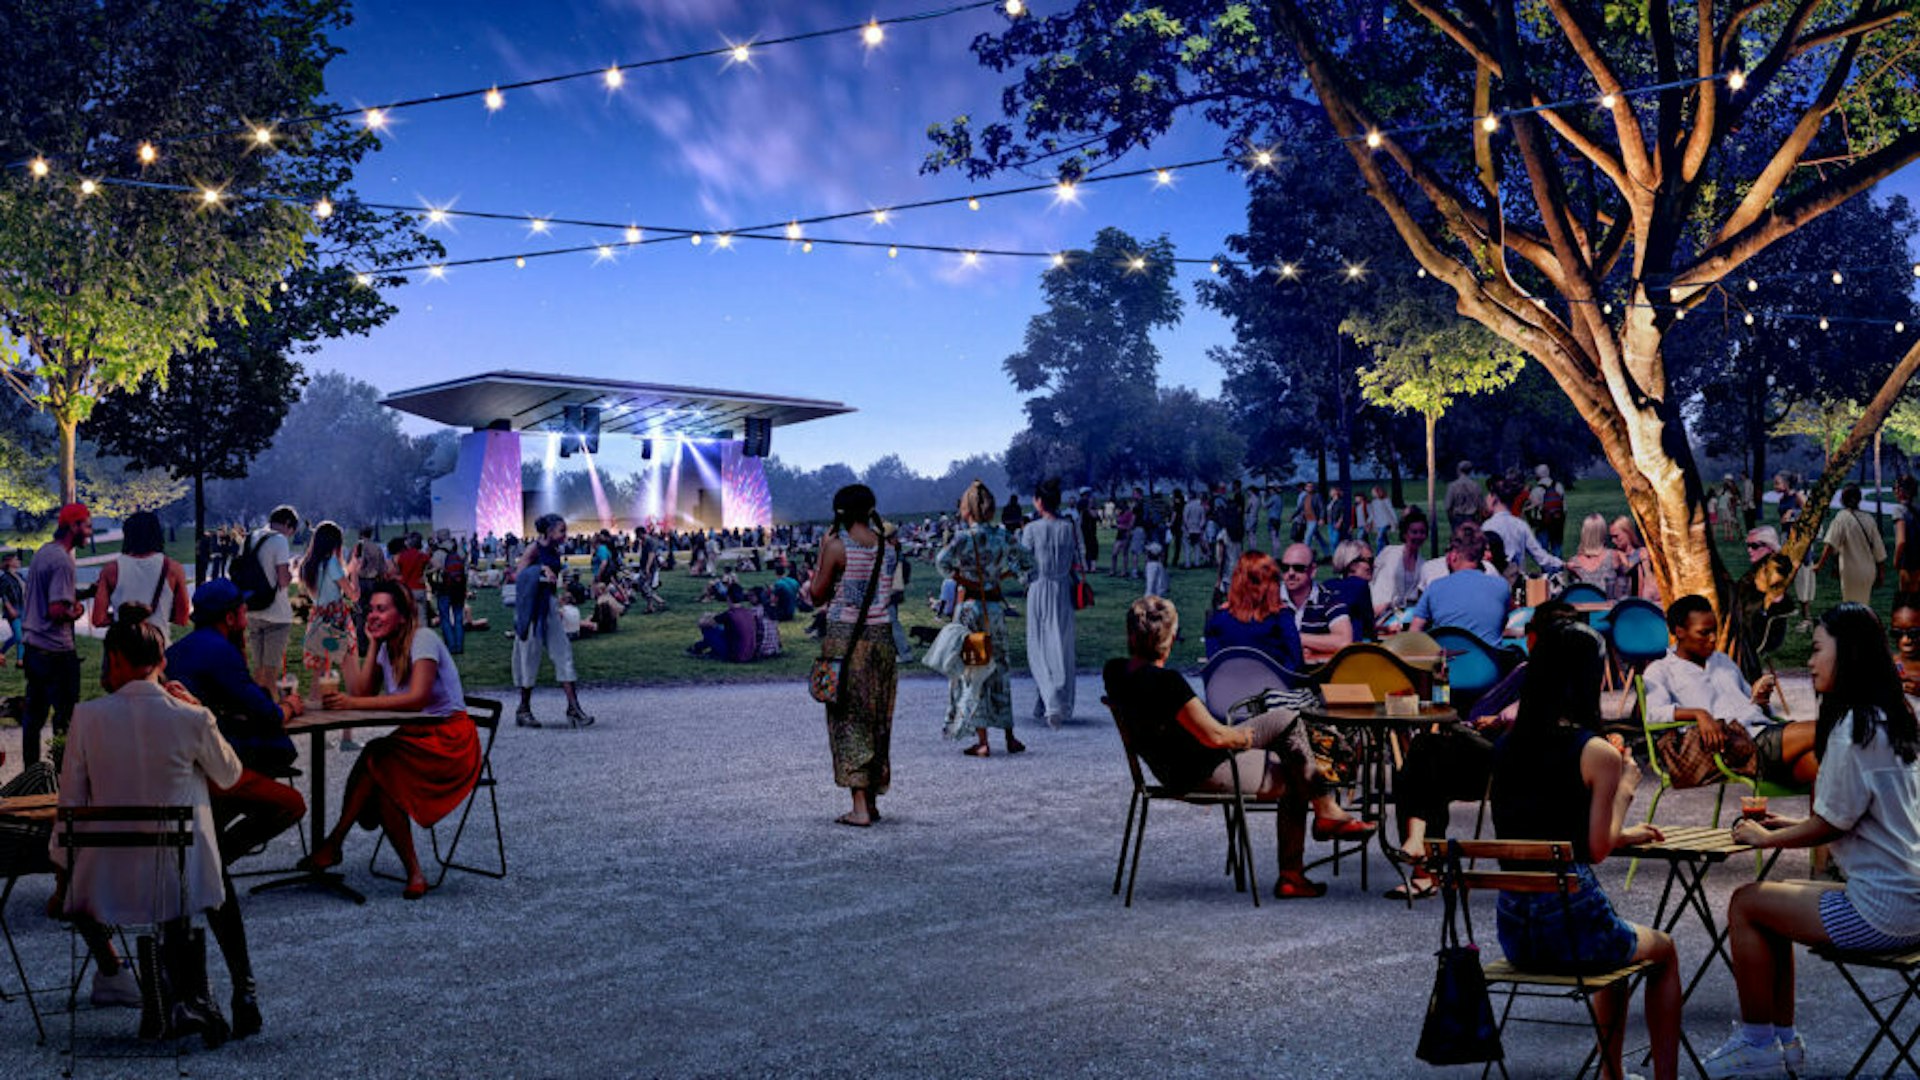 Rendering of The Amphitheater and guests at concert stage